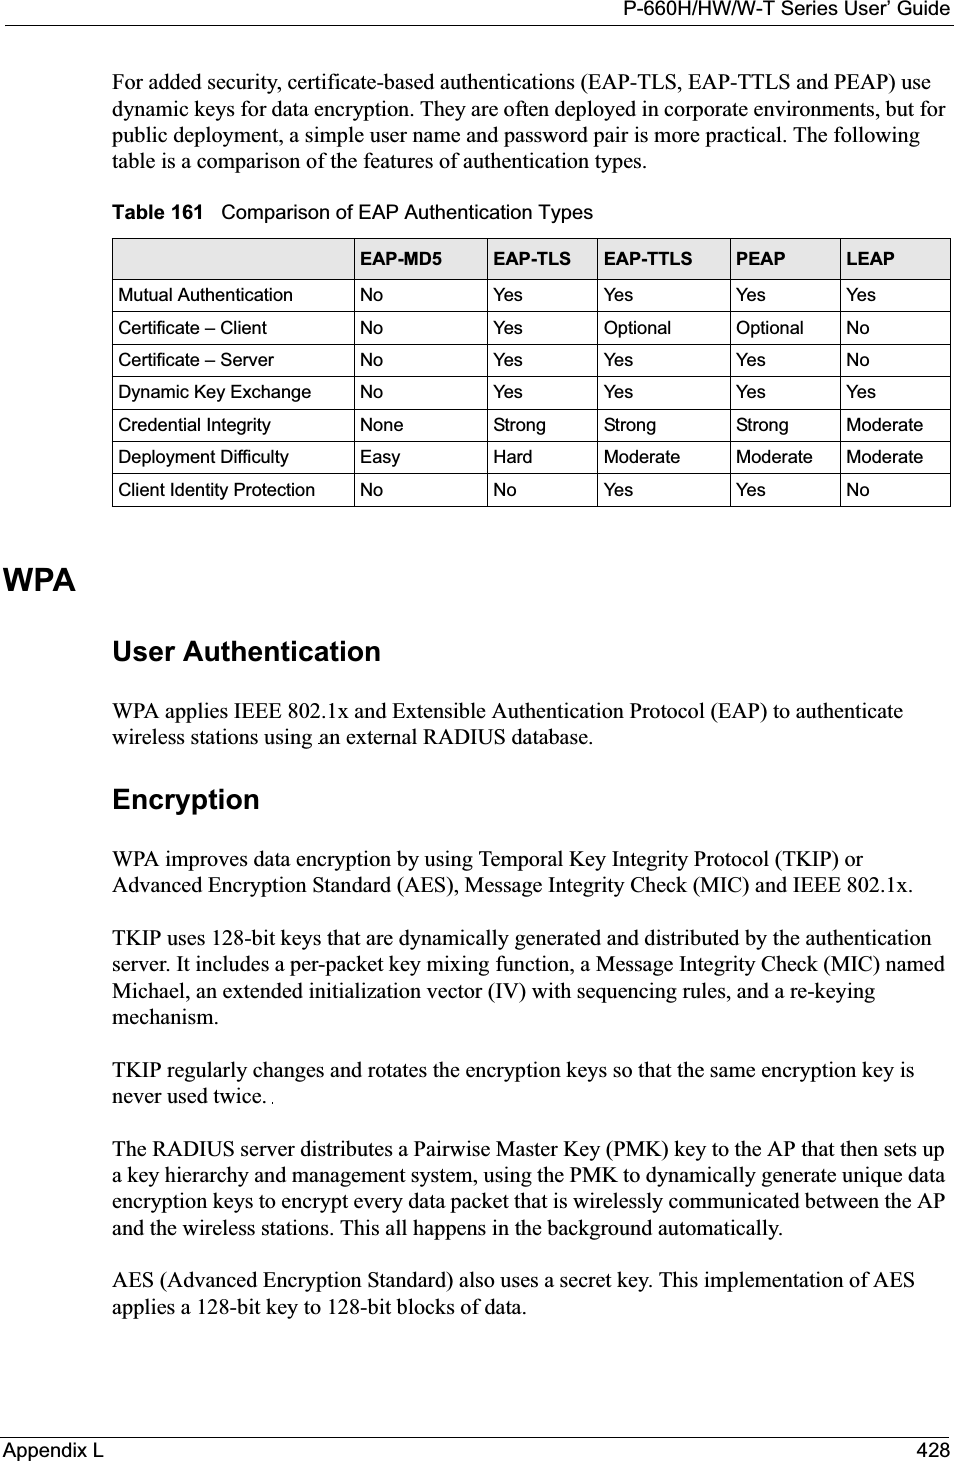 P-660H/HW/W-T Series User’ GuideAppendix L 428For added security, certificate-based authentications (EAP-TLS, EAP-TTLS and PEAP) use dynamic keys for data encryption. They are often deployed in corporate environments, but for public deployment, a simple user name and password pair is more practical. The following table is a comparison of the features of authentication types.WPAUser Authentication WPA applies IEEE 802.1x and Extensible Authentication Protocol (EAP) to authenticate wireless stations using an external RADIUS database. EncryptionWPA improves data encryption by using Temporal Key Integrity Protocol (TKIP) or Advanced Encryption Standard (AES), Message Integrity Check (MIC) and IEEE 802.1x.TKIP uses 128-bit keys that are dynamically generated and distributed by the authentication server. It includes a per-packet key mixing function, a Message Integrity Check (MIC) named Michael, an extended initialization vector (IV) with sequencing rules, and a re-keying mechanism.TKIP regularly changes and rotates the encryption keys so that the same encryption key is never used twice. The RADIUS server distributes a Pairwise Master Key (PMK) key to the AP that then sets up a key hierarchy and management system, using the PMK to dynamically generate unique data encryption keys to encrypt every data packet that is wirelessly communicated between the AP and the wireless stations. This all happens in the background automatically.AES (Advanced Encryption Standard) also uses a secret key. This implementation of AES applies a 128-bit key to 128-bit blocks of data.Table 161   Comparison of EAP Authentication TypesEAP-MD5 EAP-TLS EAP-TTLS PEAP LEAPMutual Authentication No Yes Yes Yes YesCertificate – Client No Ye s Optional Optional NoCertificate – Server No Yes Yes Yes NoDynamic Key Exchange No Yes Yes Yes Ye sCredential Integrity None Strong Strong Strong ModerateDeployment Difficulty Easy Hard Moderate Moderate ModerateClient Identity Protection No No Yes Ye s No